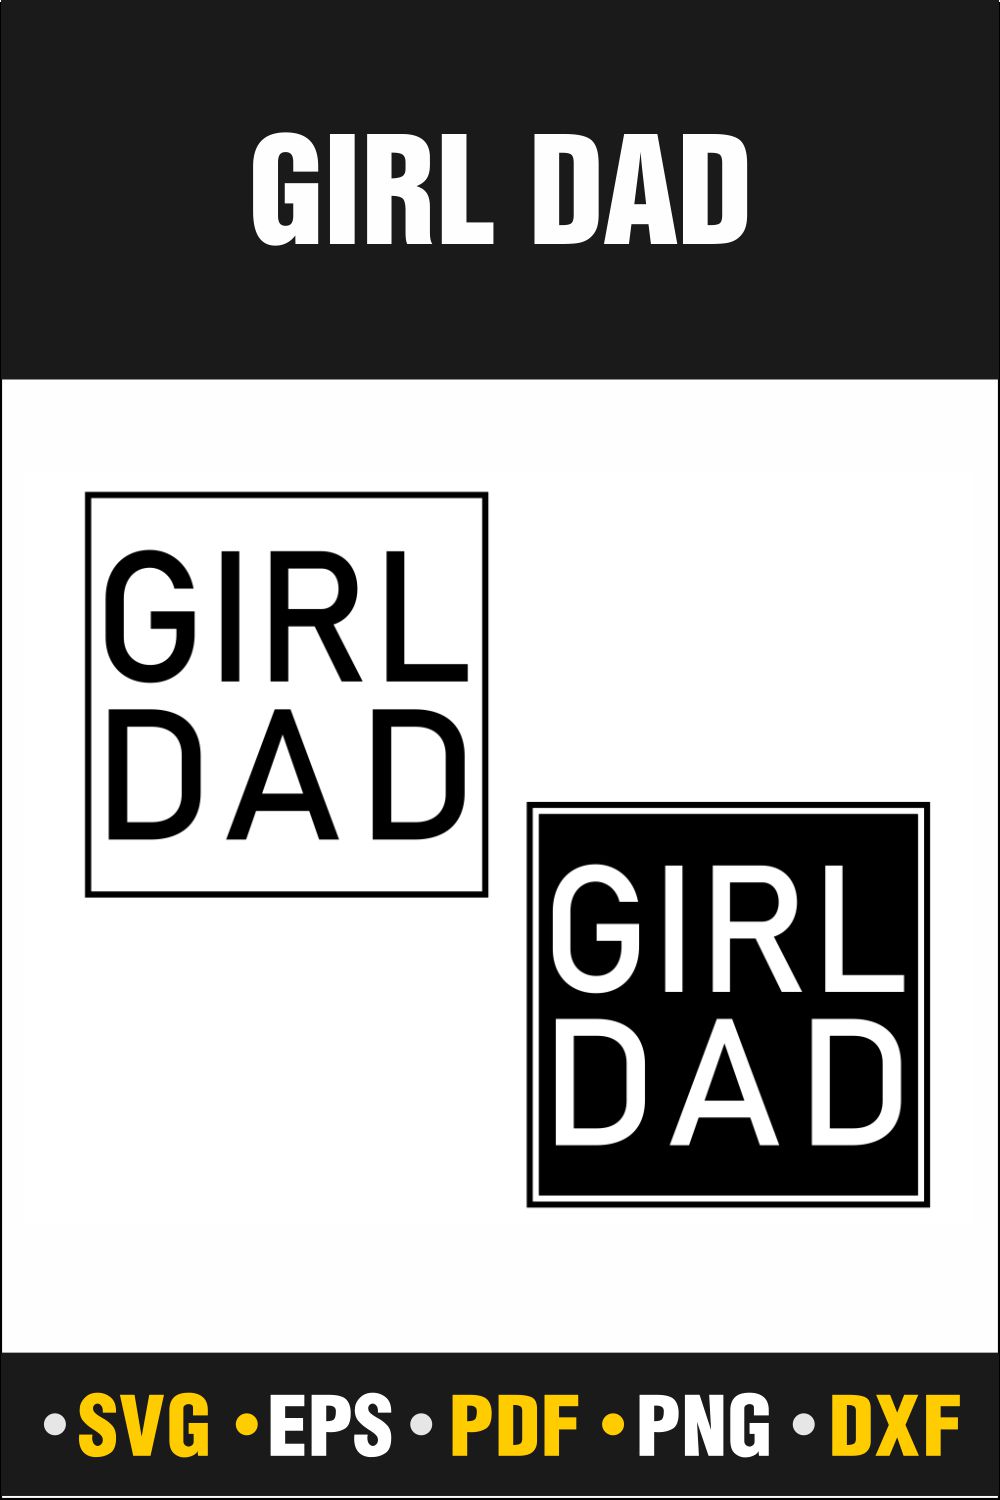 Girl Dad Svg, Girl Dad, Girl Dad Svg, Girl Dad Outline Png, Girl Dad Monogram Png, Girl Dad Svg, Girl Dad Svg, Instant Download Vector Cut file Cricut, Silhouette, Pdf Png, Dxf, Decal pinterest preview image.